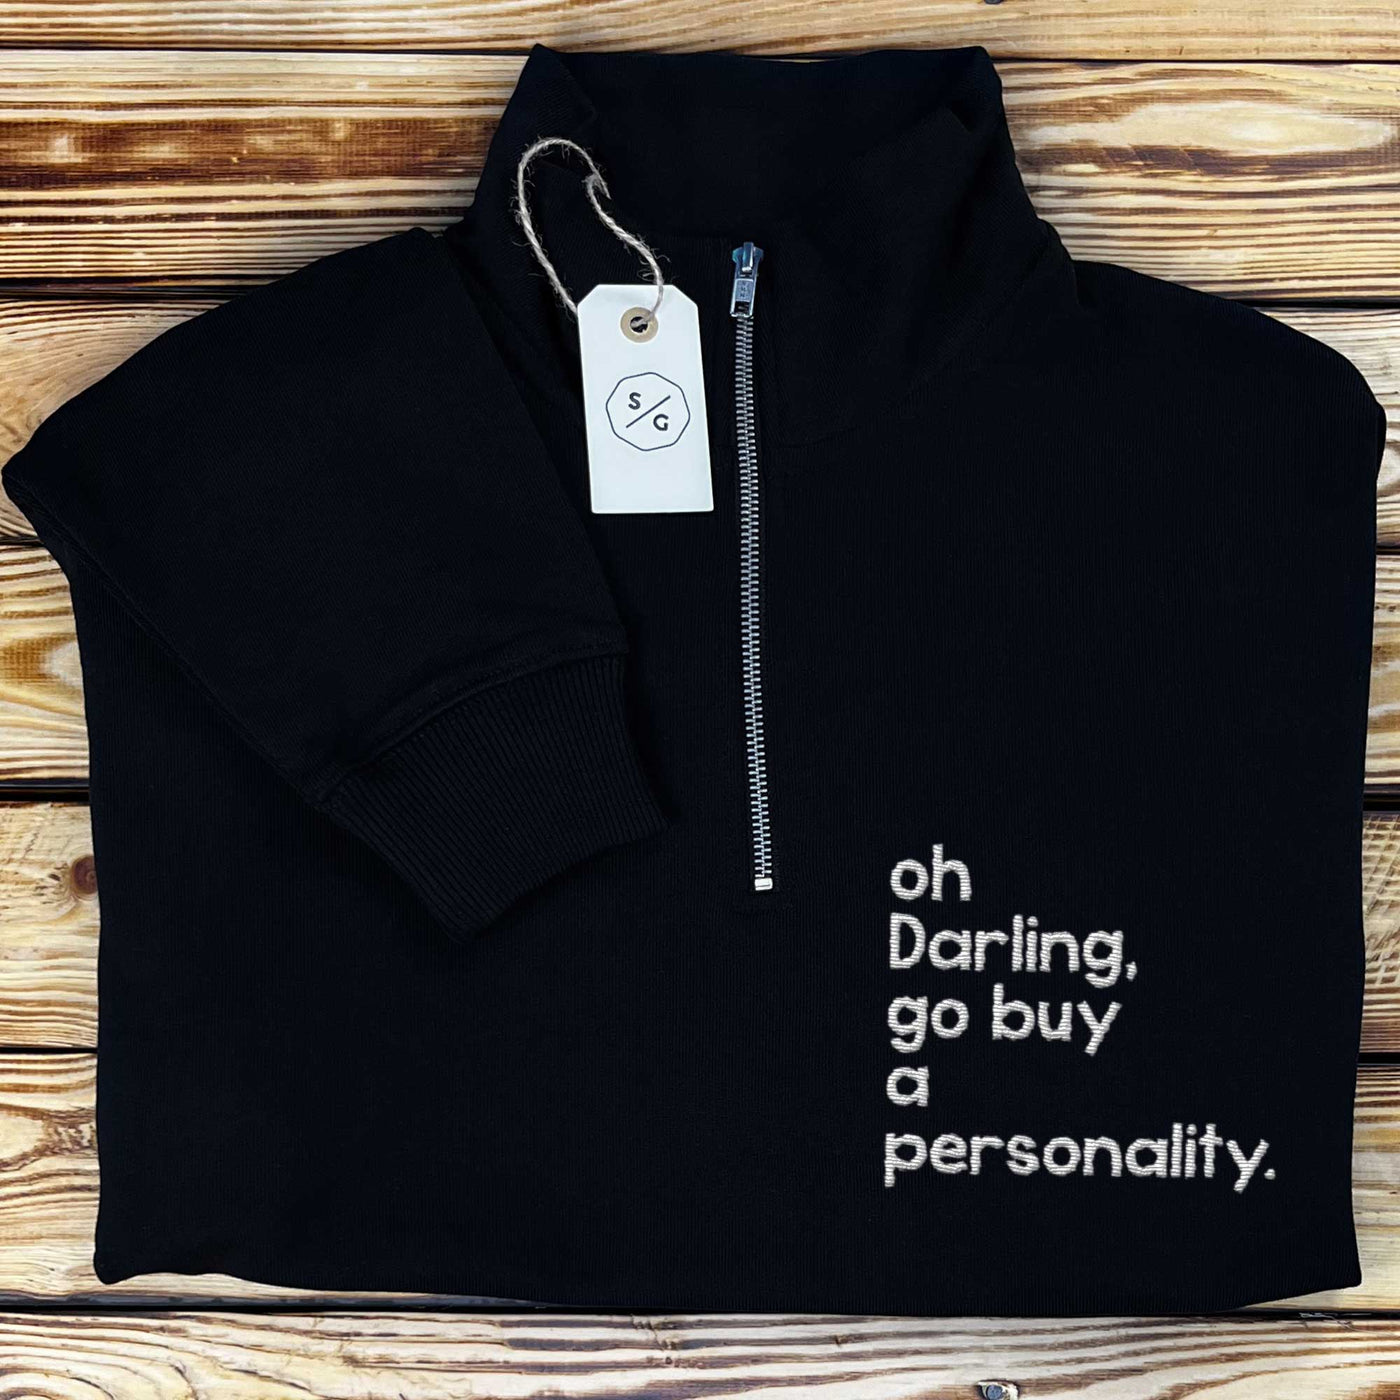 EMBROIDERED HALF-ZIP SWEATER • OH DARLING, GO BUY A PERSONALITY.